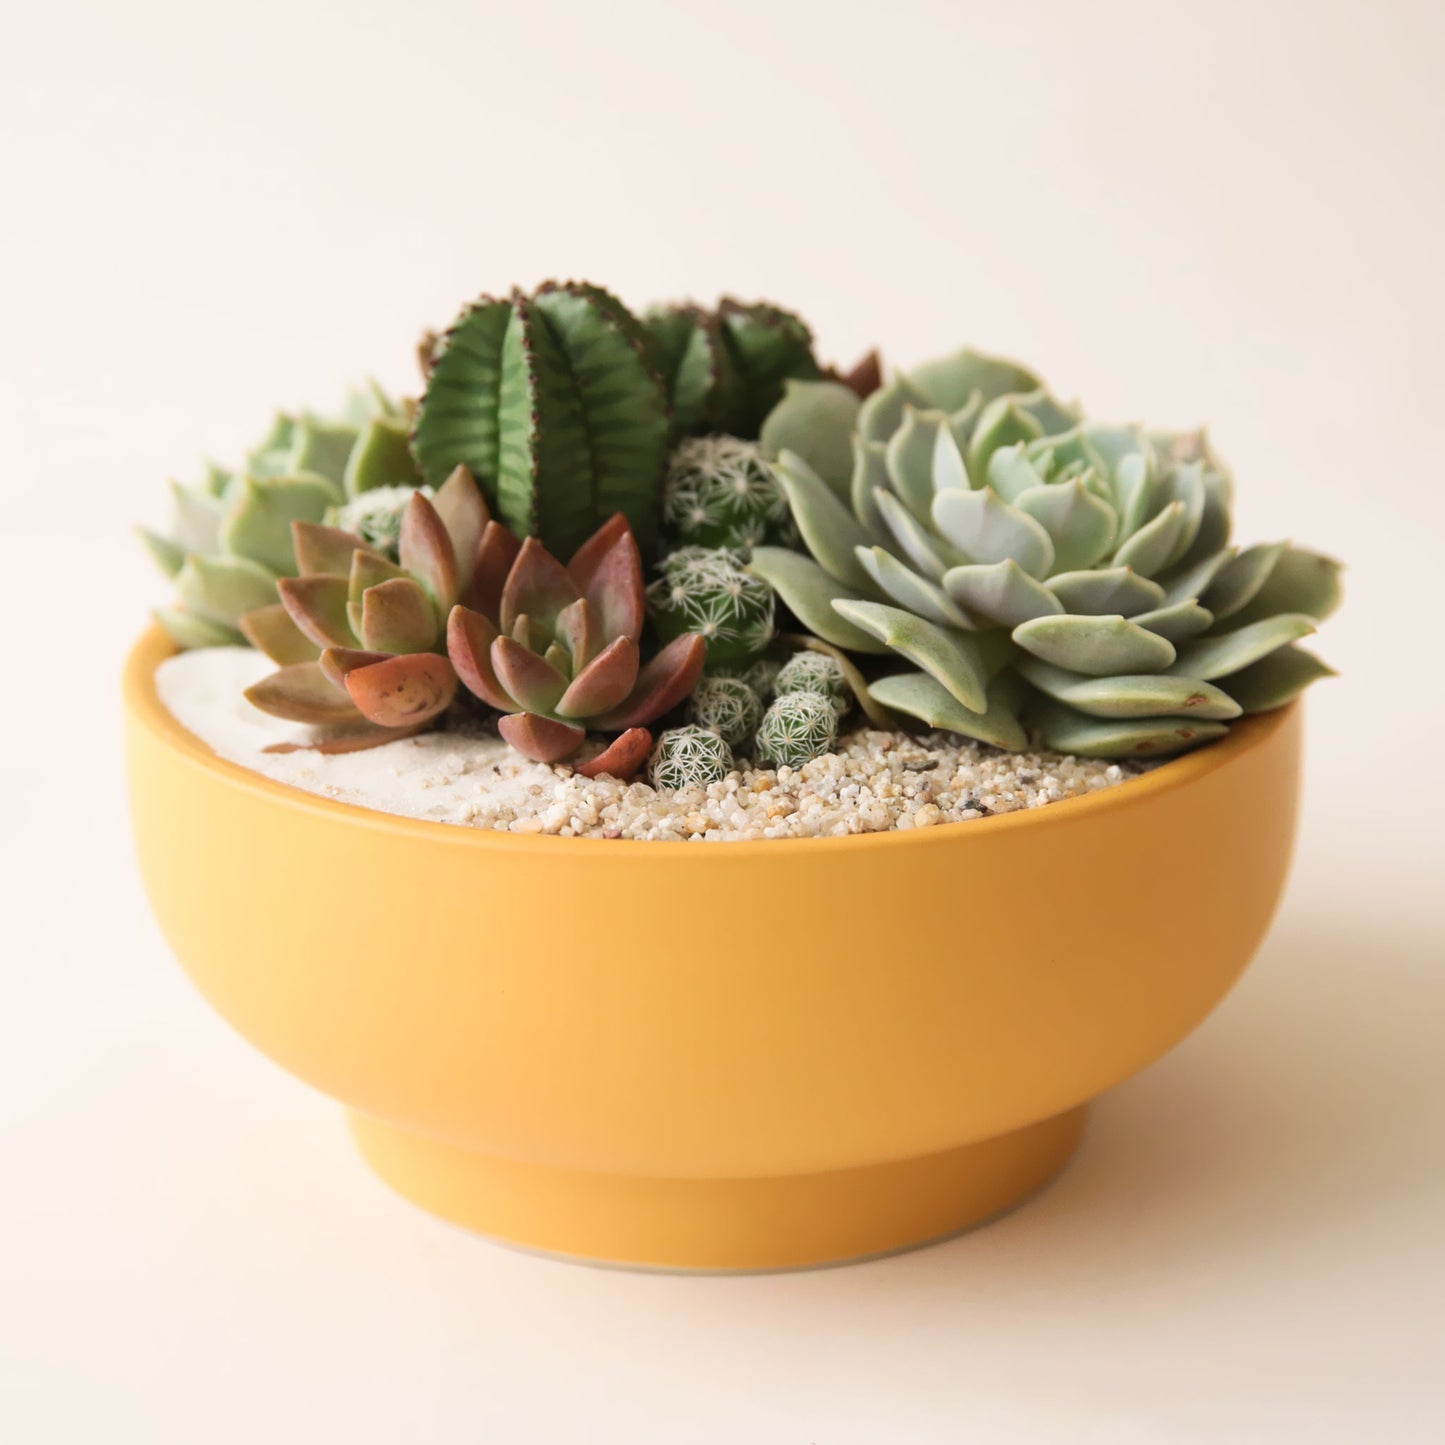 On a cream background is a yellow ceramic pedestal bowl with a succulent and cacti arrangement inside. 